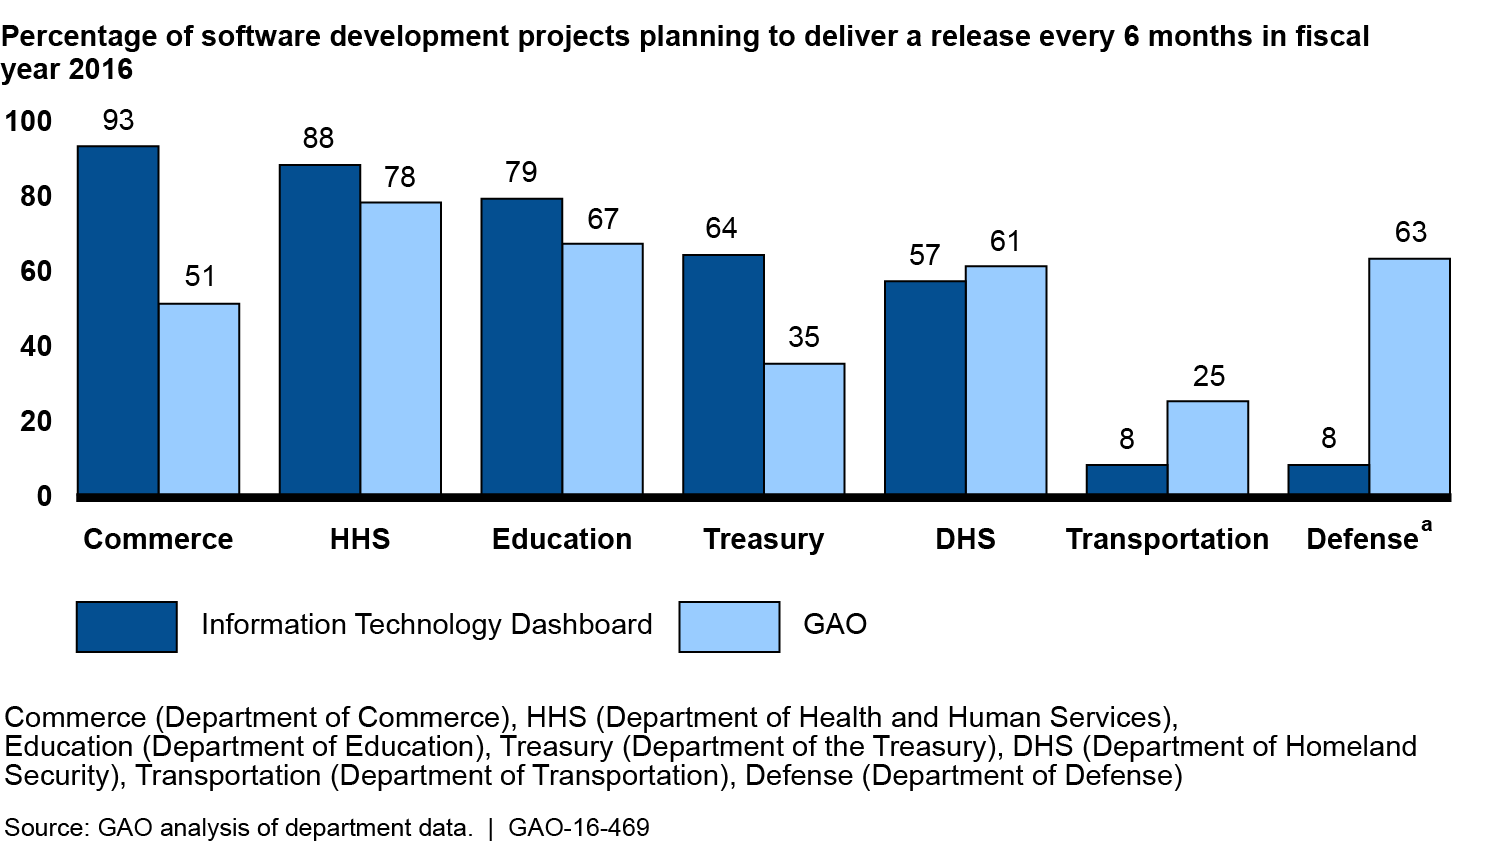 Comparison of Software Development Projects' Percentage of Planned Delivery Every Six Months Reported on IT Dashboard and to GAO for Fiscal Year 2016